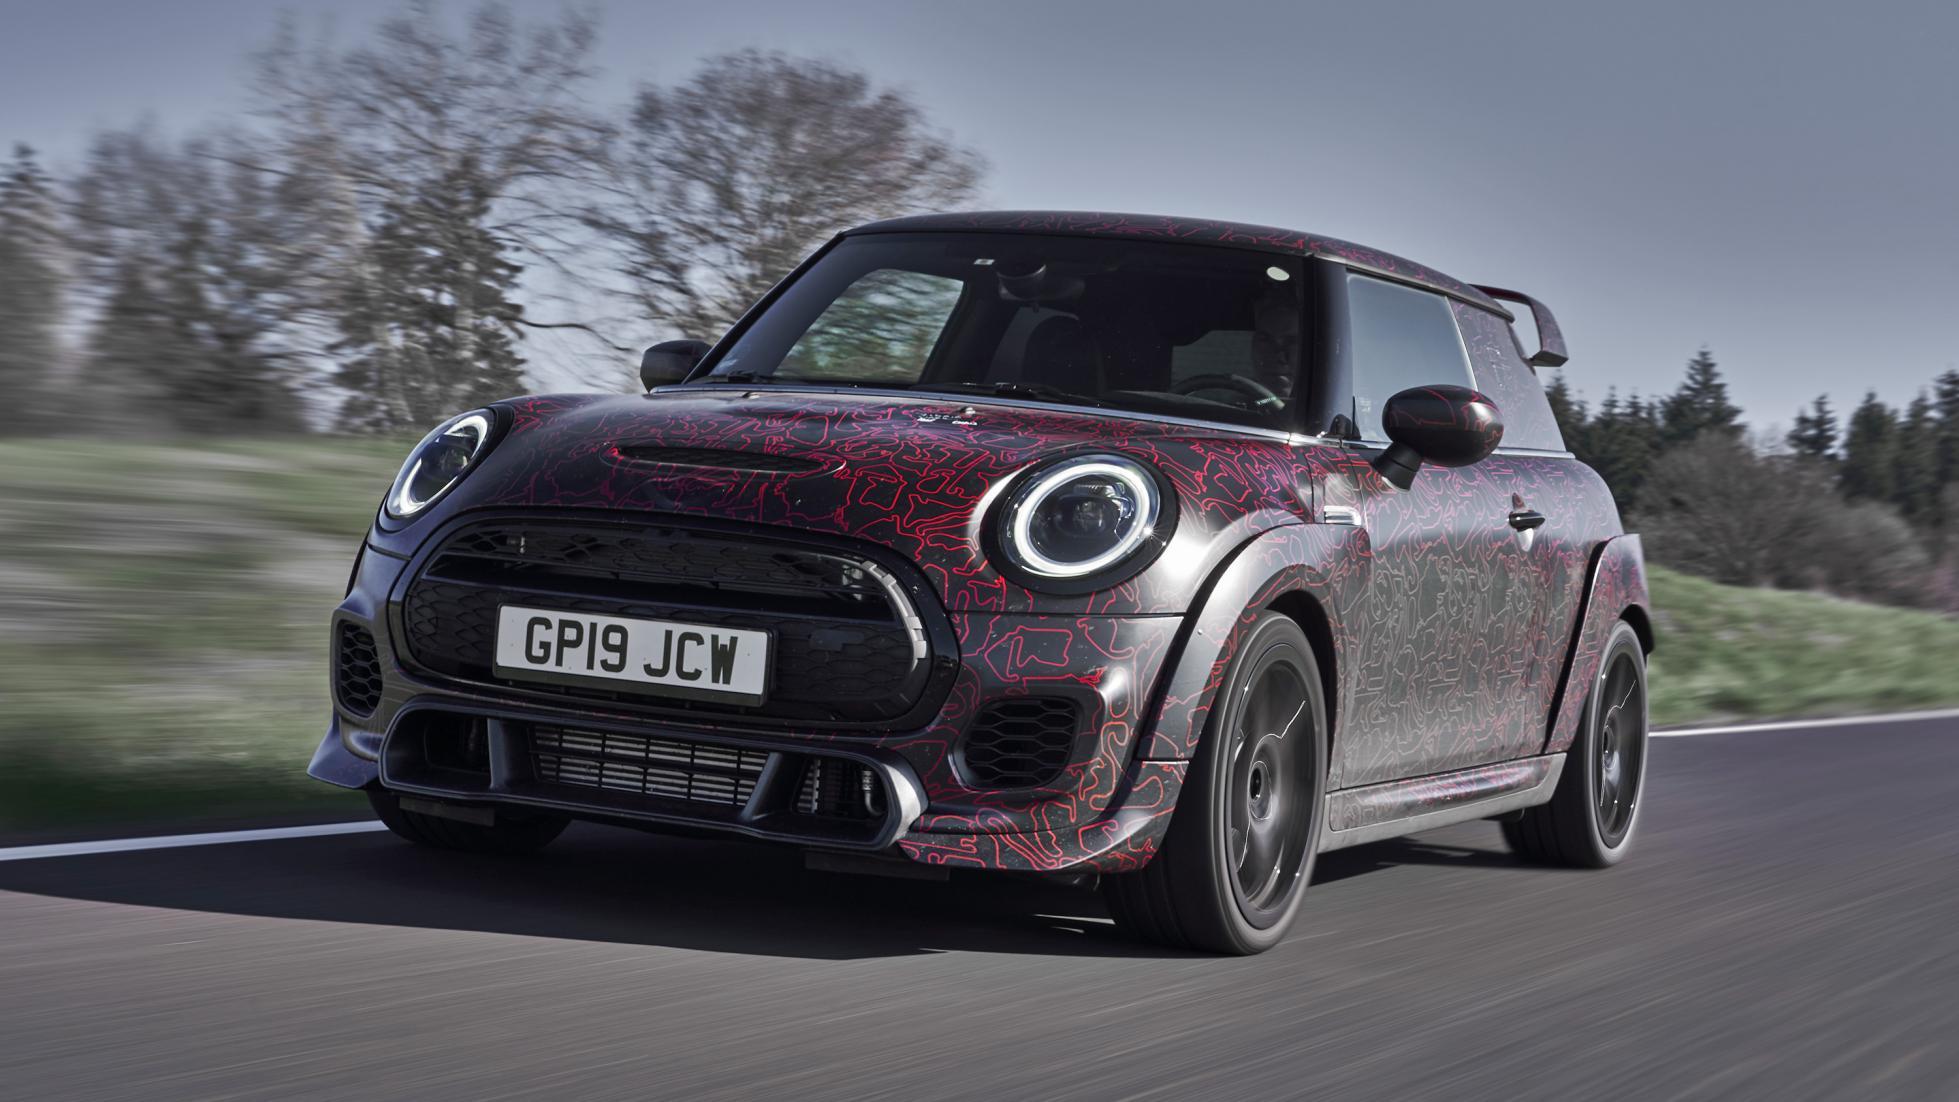 The new Mini GP will cost more than a Civic Type R